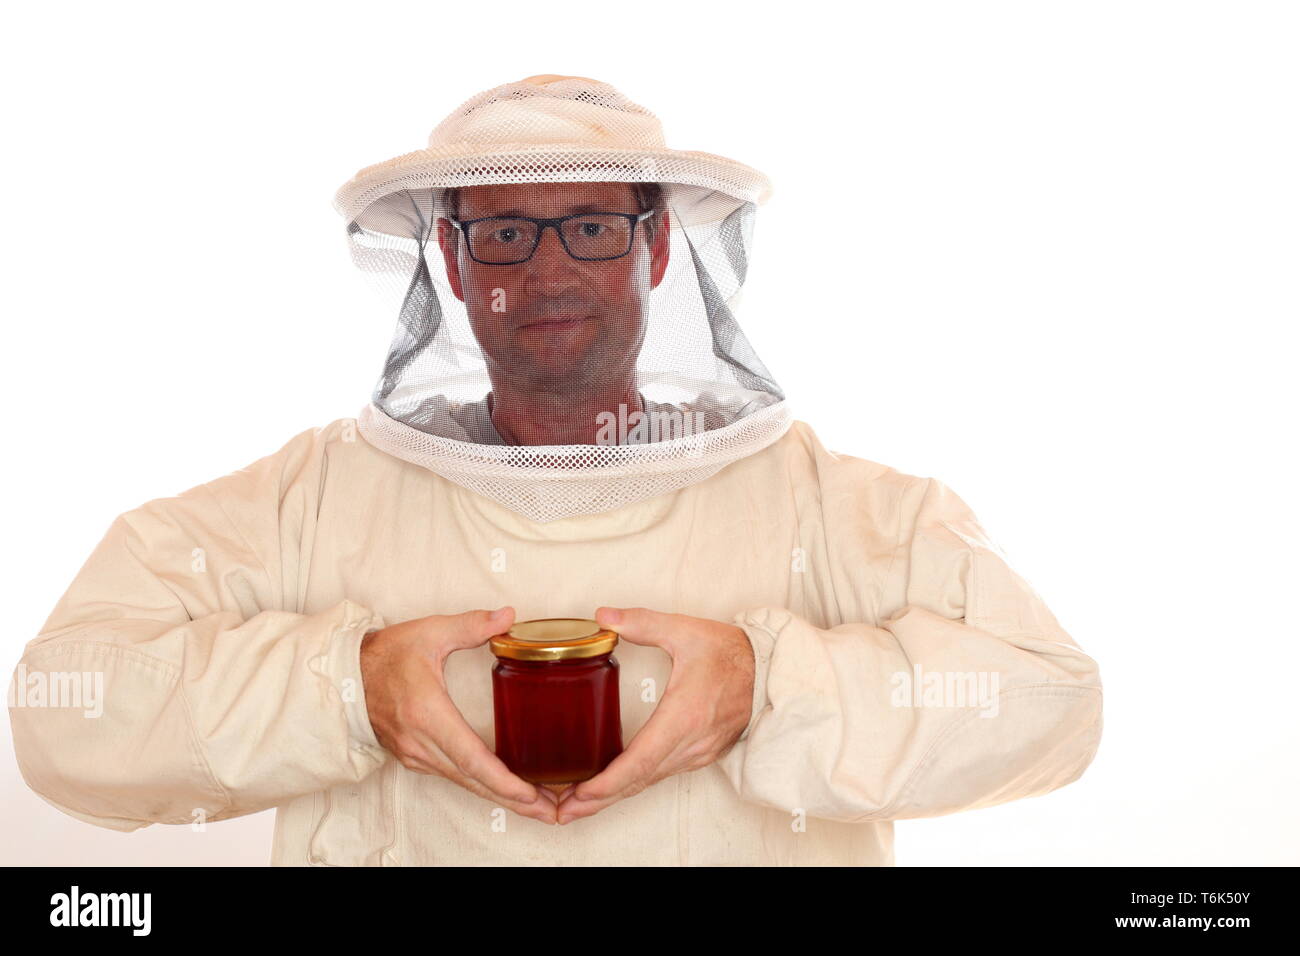 apiarist with honey glass in hands Stock Photo